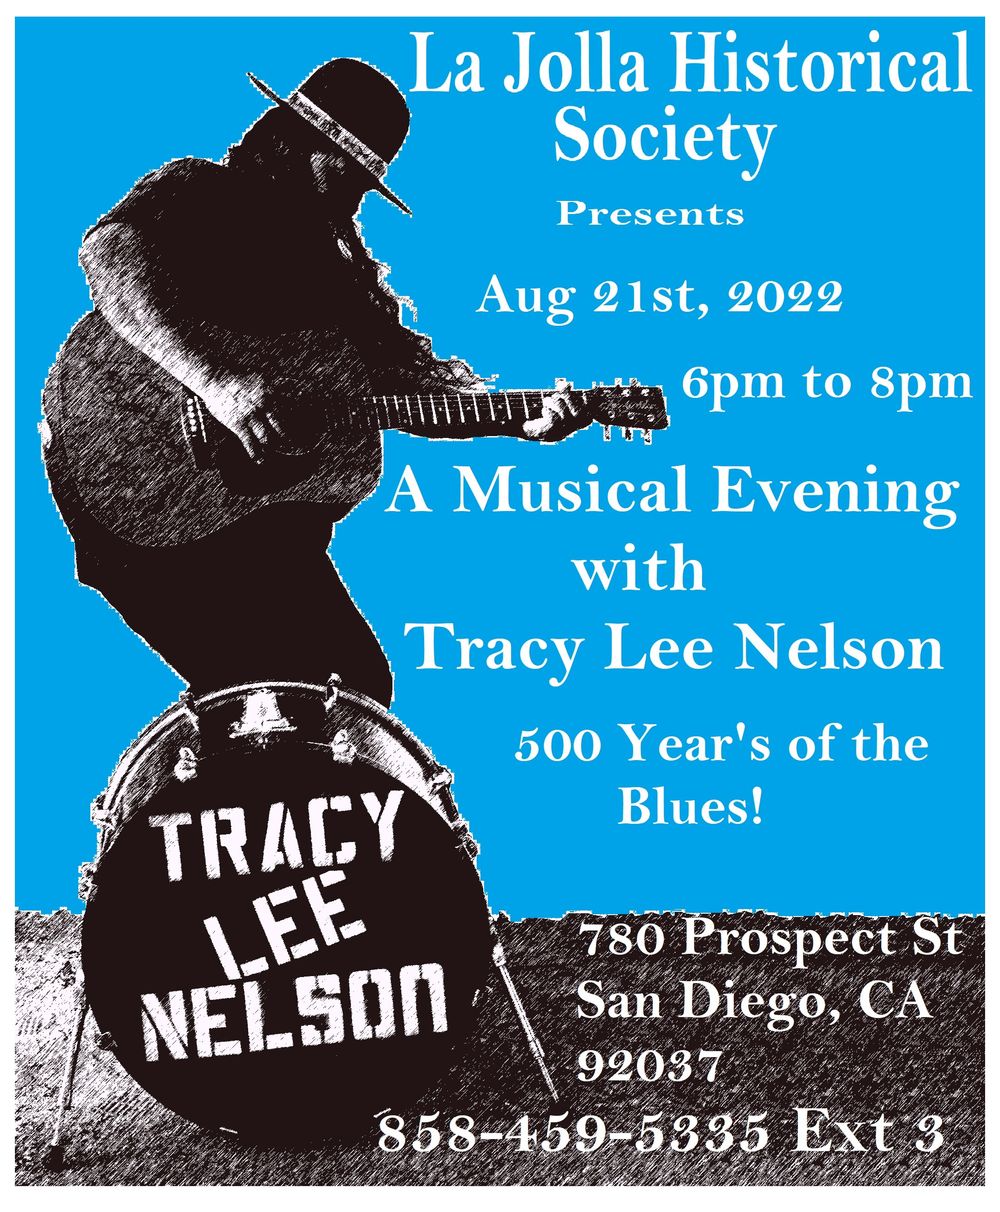 Don't forget to bring your Lawn chairs and a Blanket, and enjoy Tracy's original acoustic native blues. 500 years of the blues!